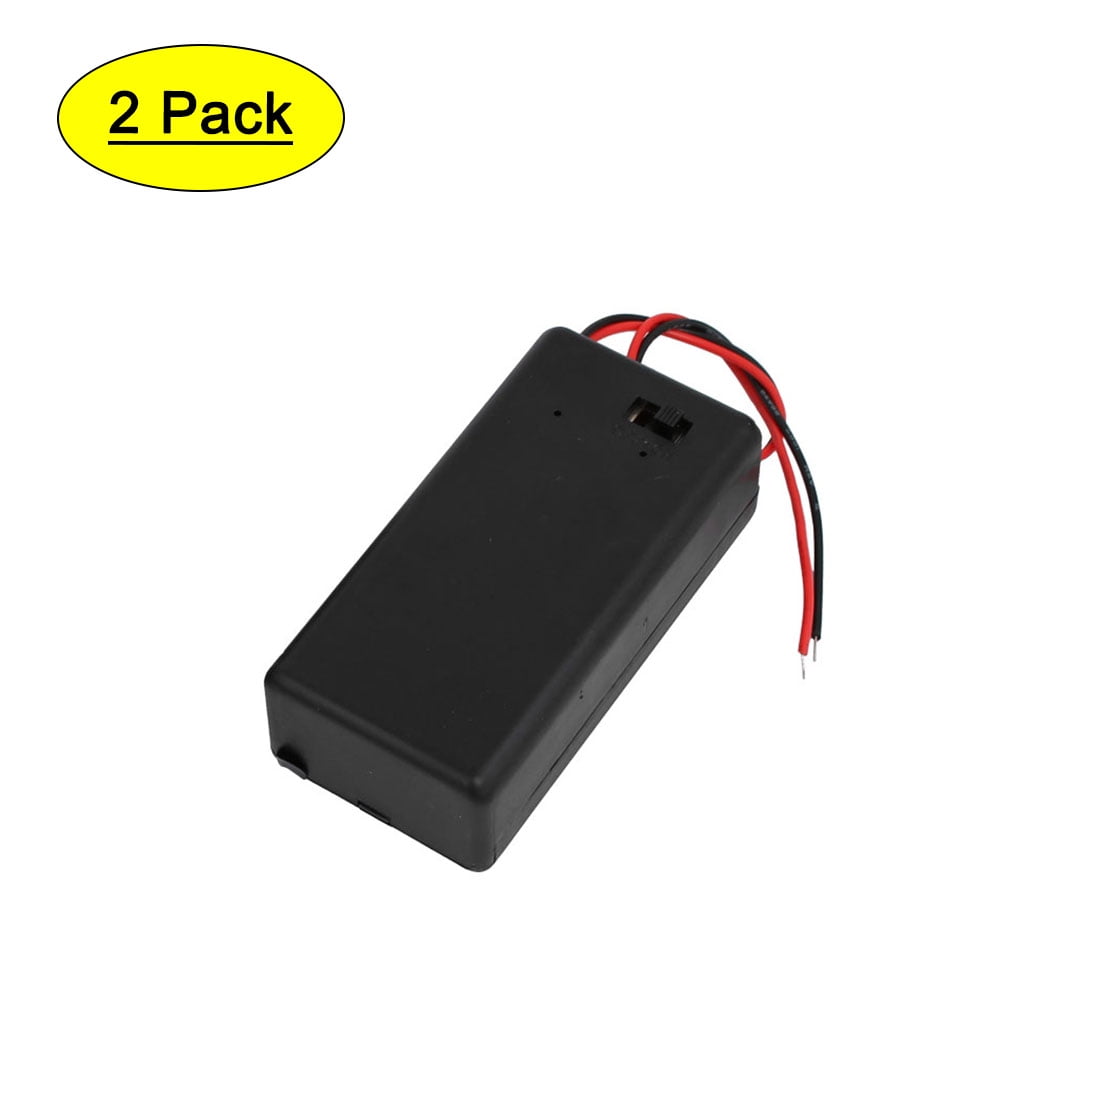 5PCS DC 9V Volt Battery Clip Holder Box Case w/ Wire Lead ON/OFF Switch Cover 